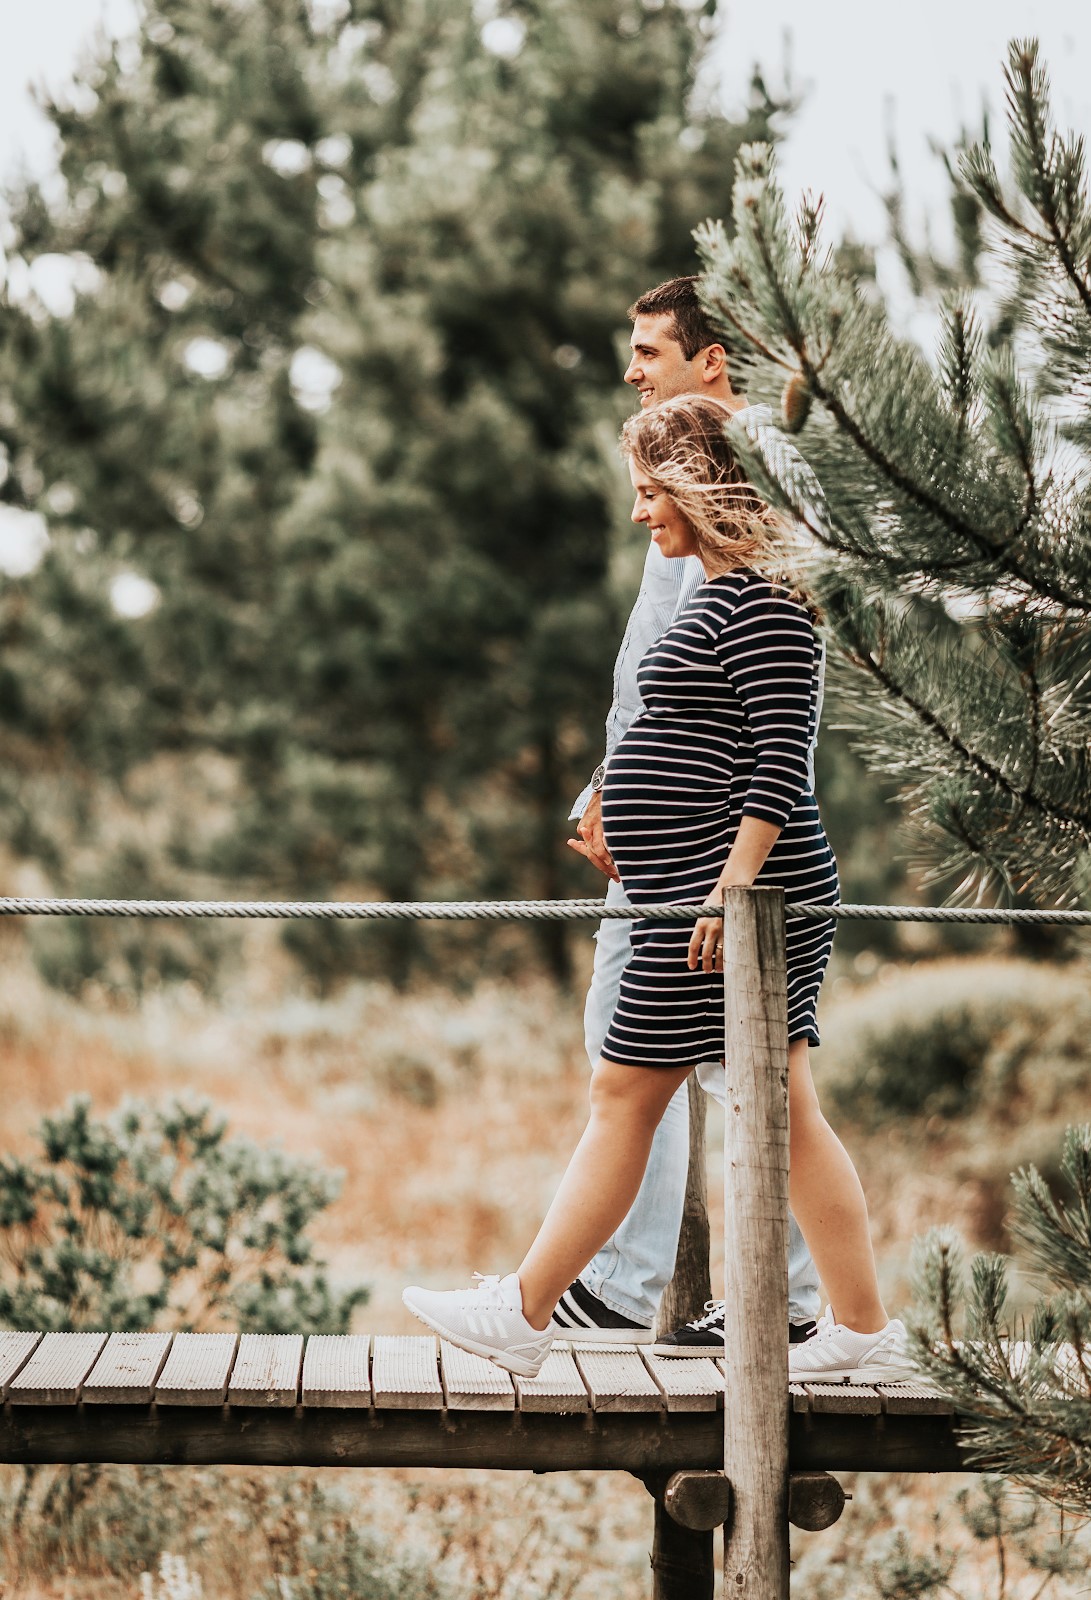 a couple walking along a wooden bridge holding hands. the woman is pregnant